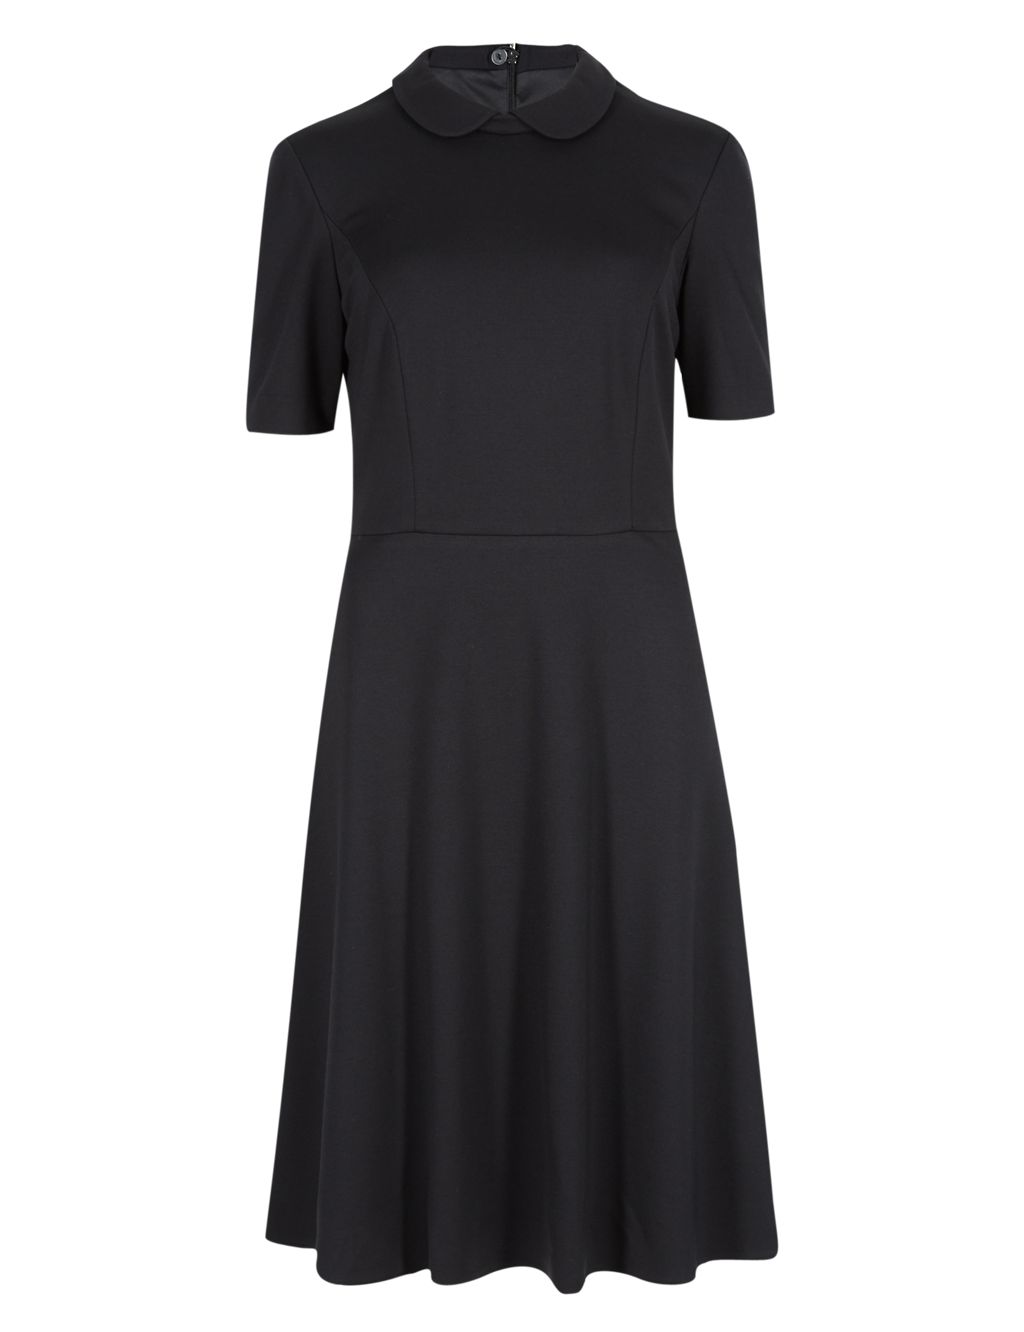 Collared Neck Skater Dress | M&S Collection | M&S